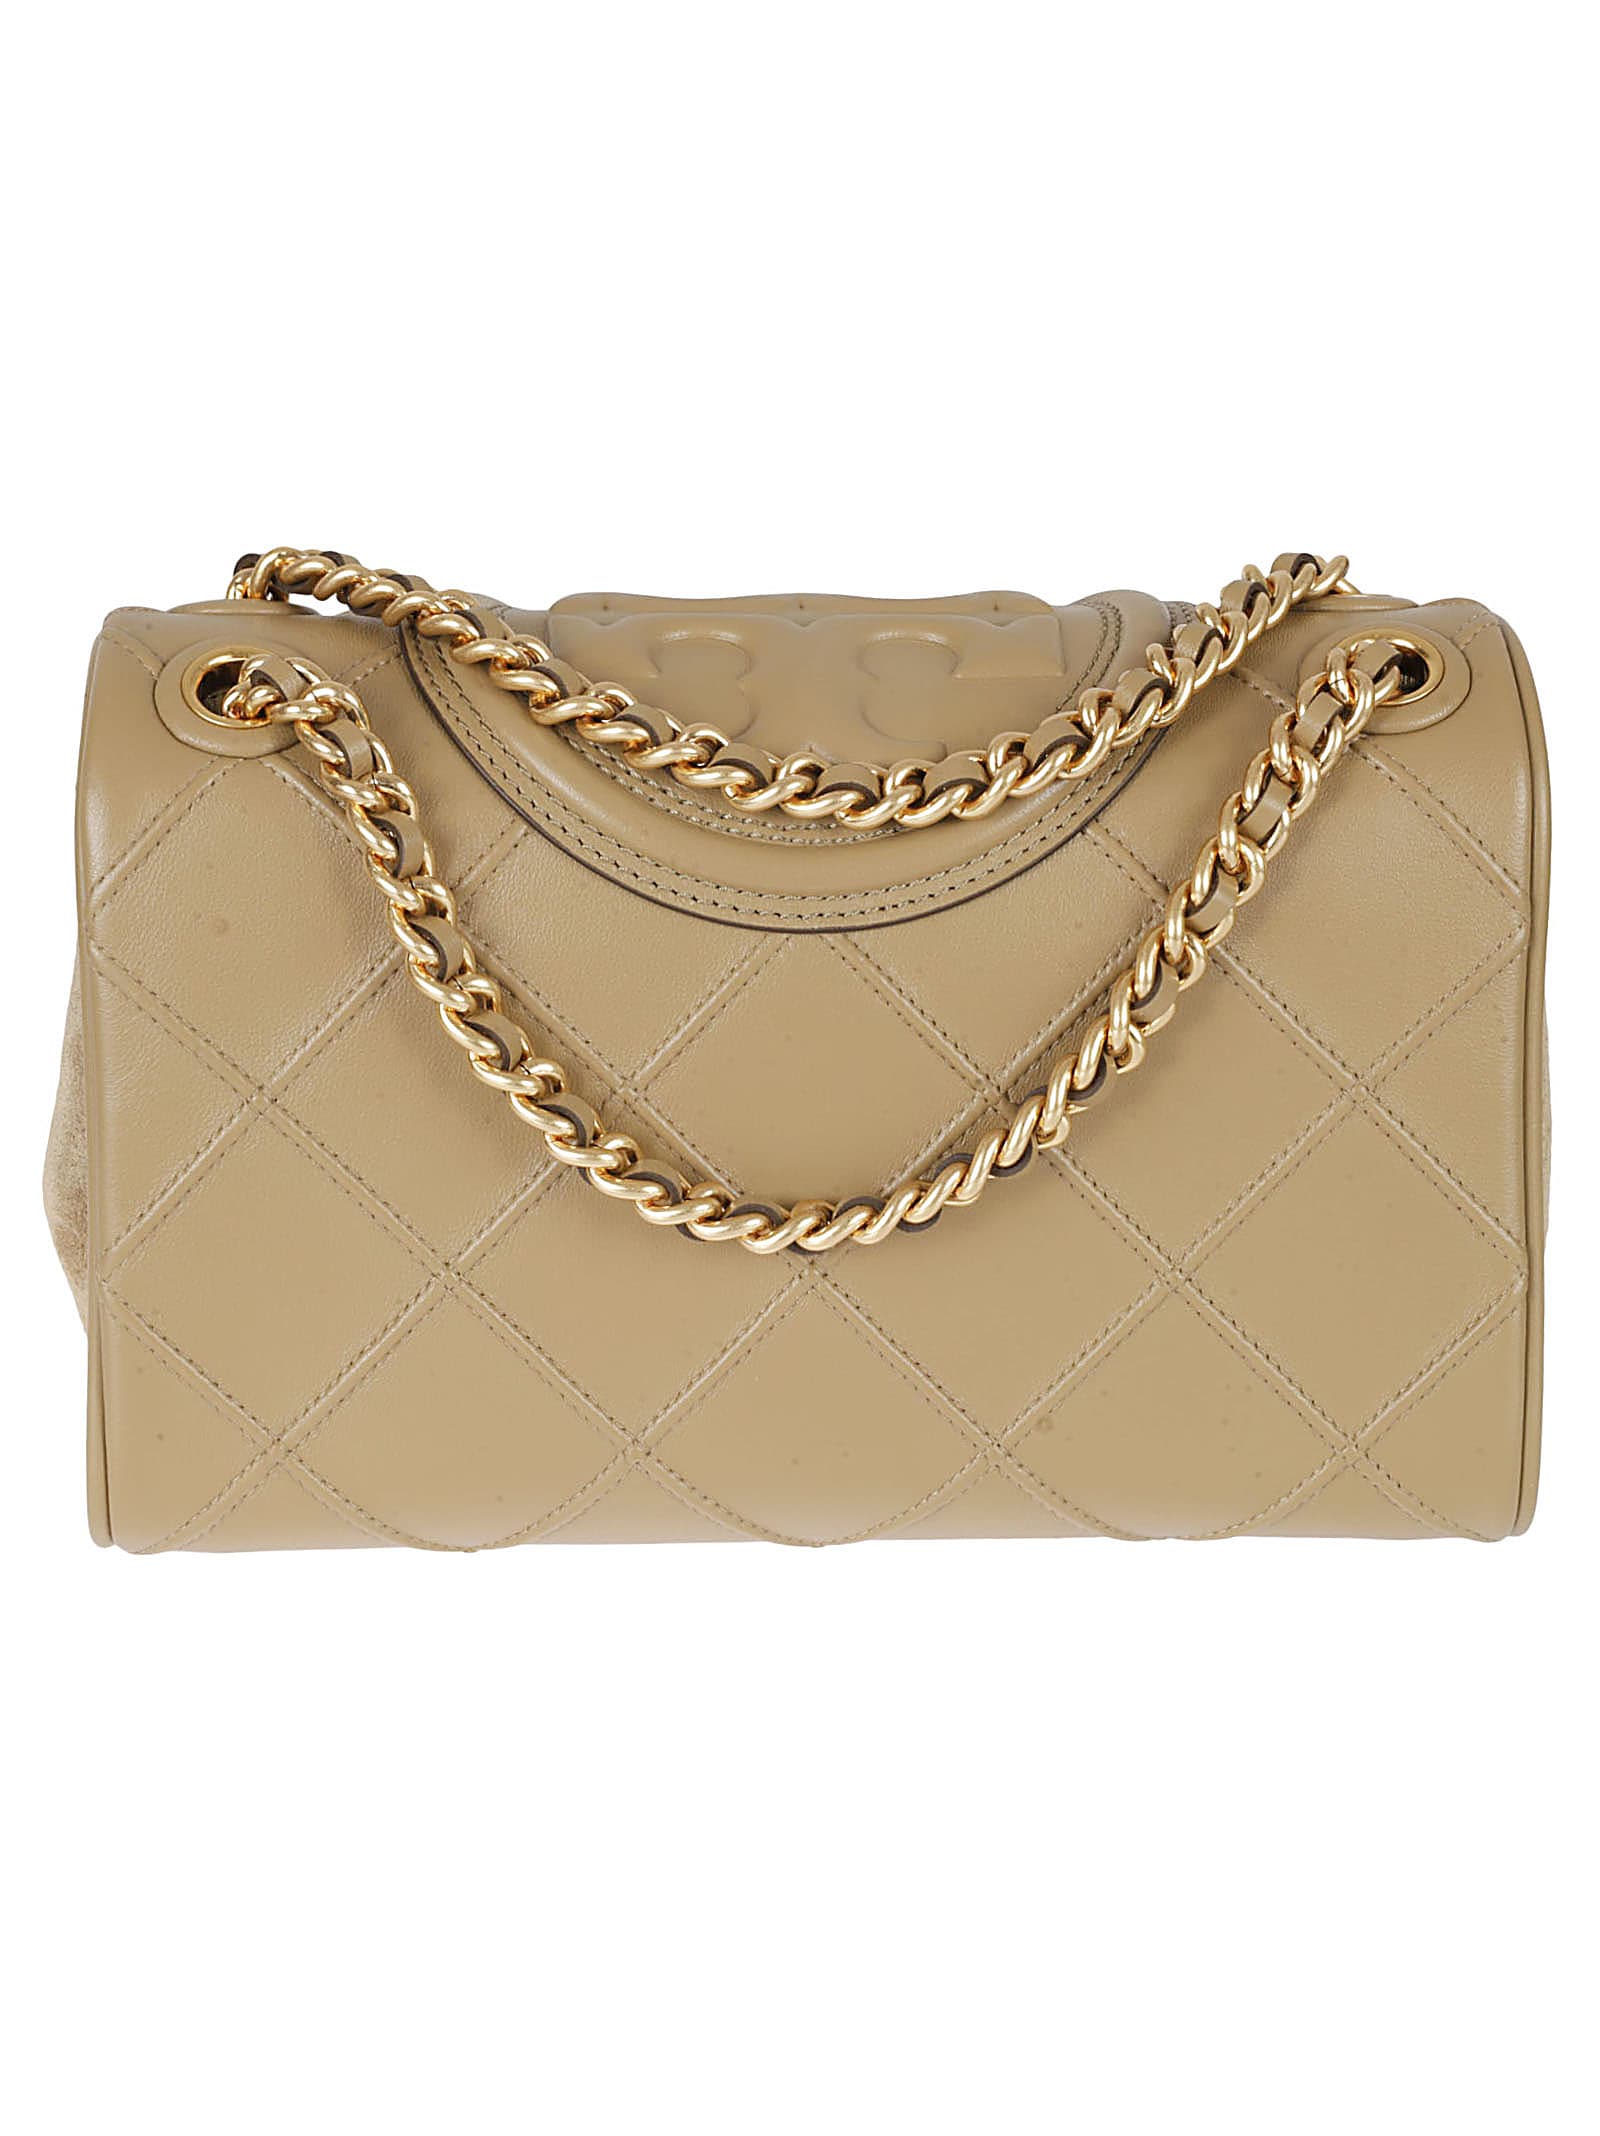 Tory Burch Fleming Soft Small Convertible Shoulder Bag | italist, ALWAYS  LIKE A SALE